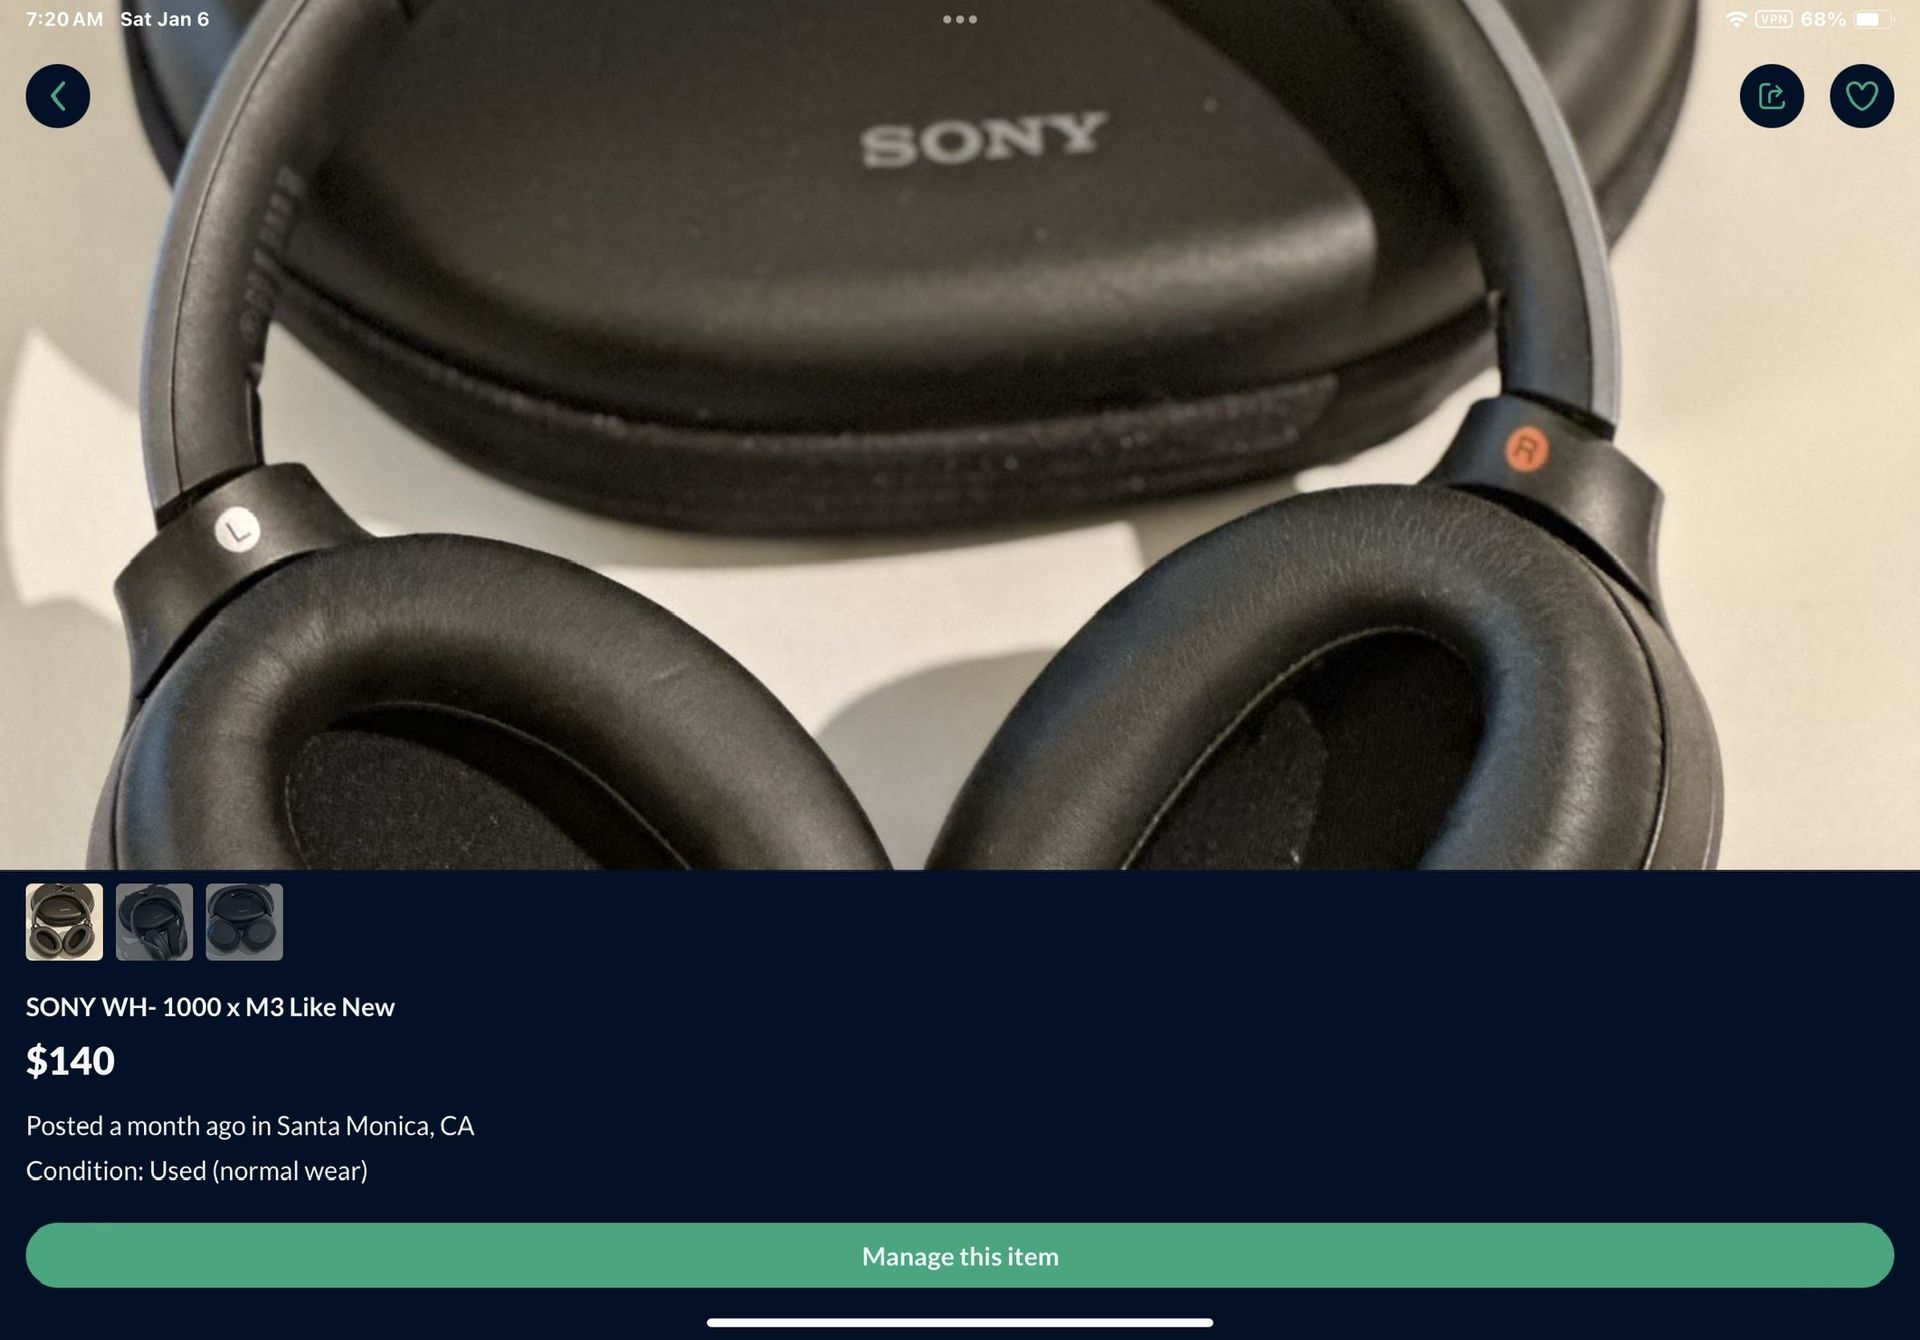 SONY WH- 1000 x M3 Like New